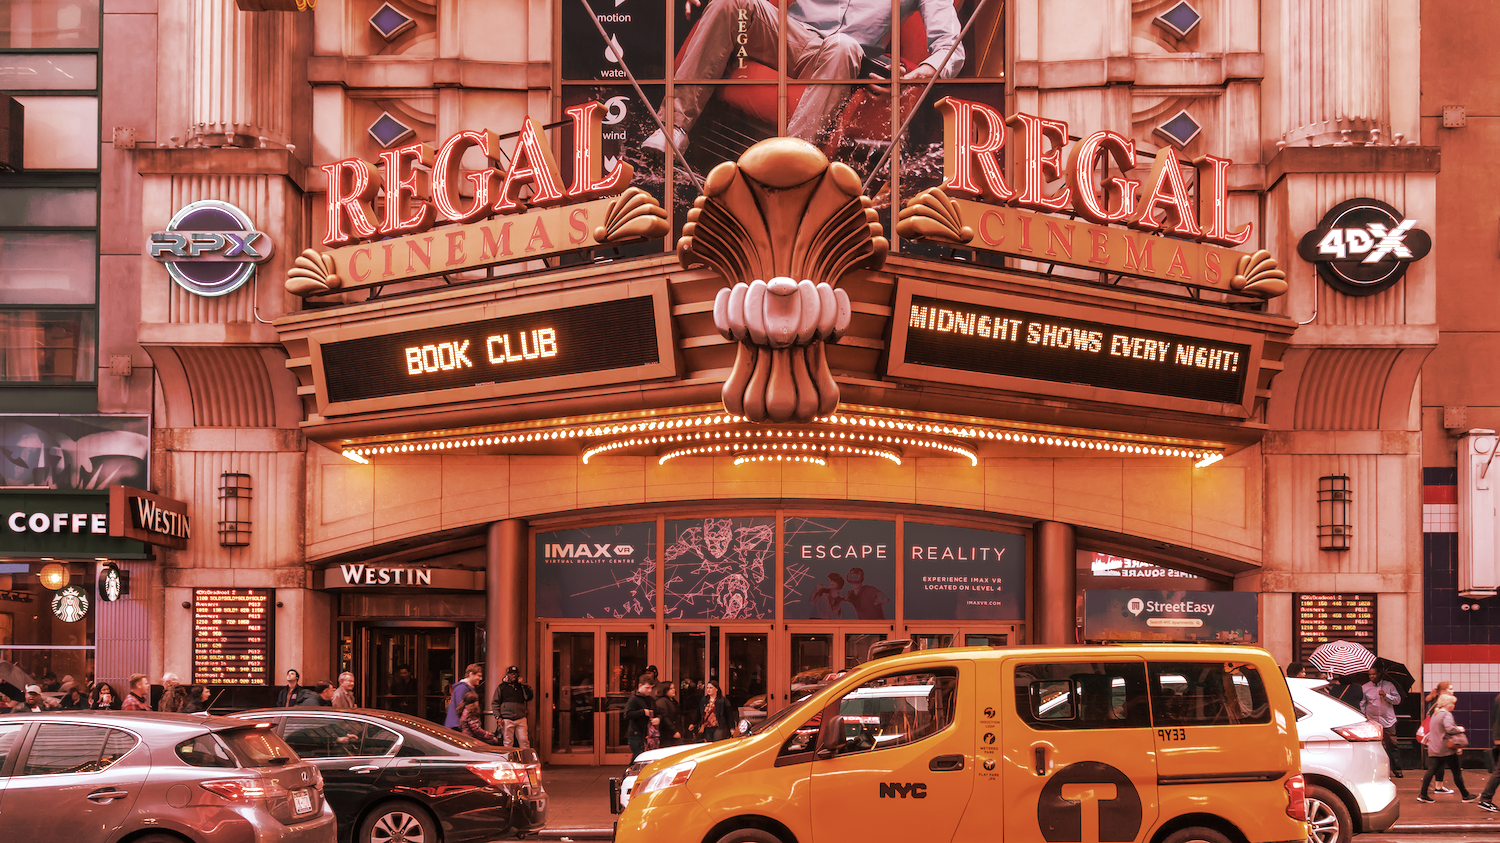 Regal Apes AMC: Now Accepts Bitcoin, Ethereum, Dogecoin for Movie Tickets